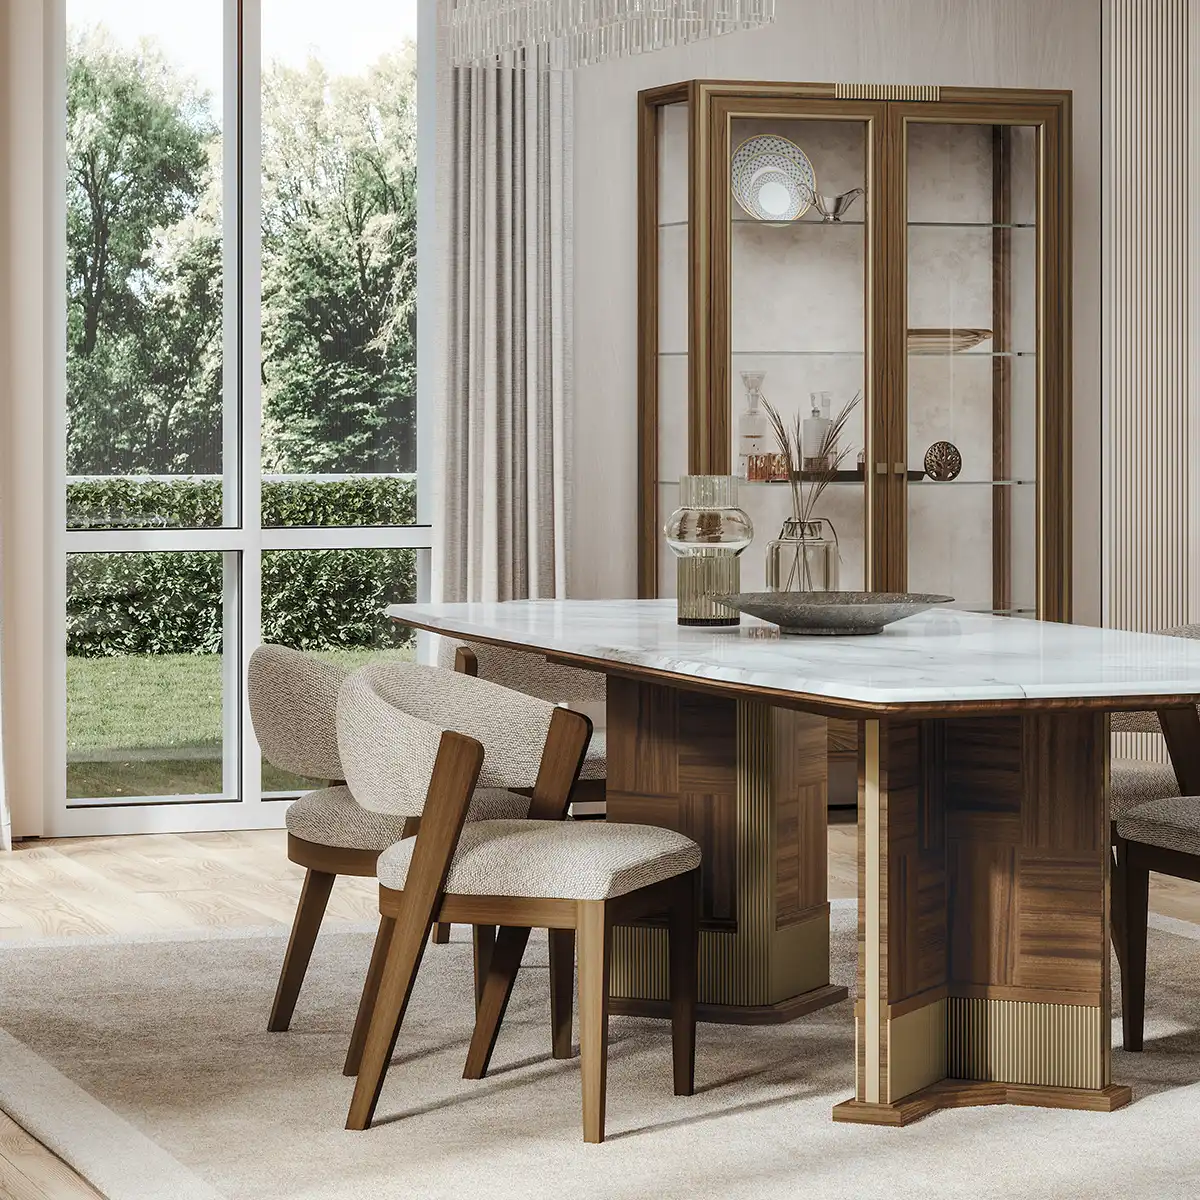 Brera table with marble top